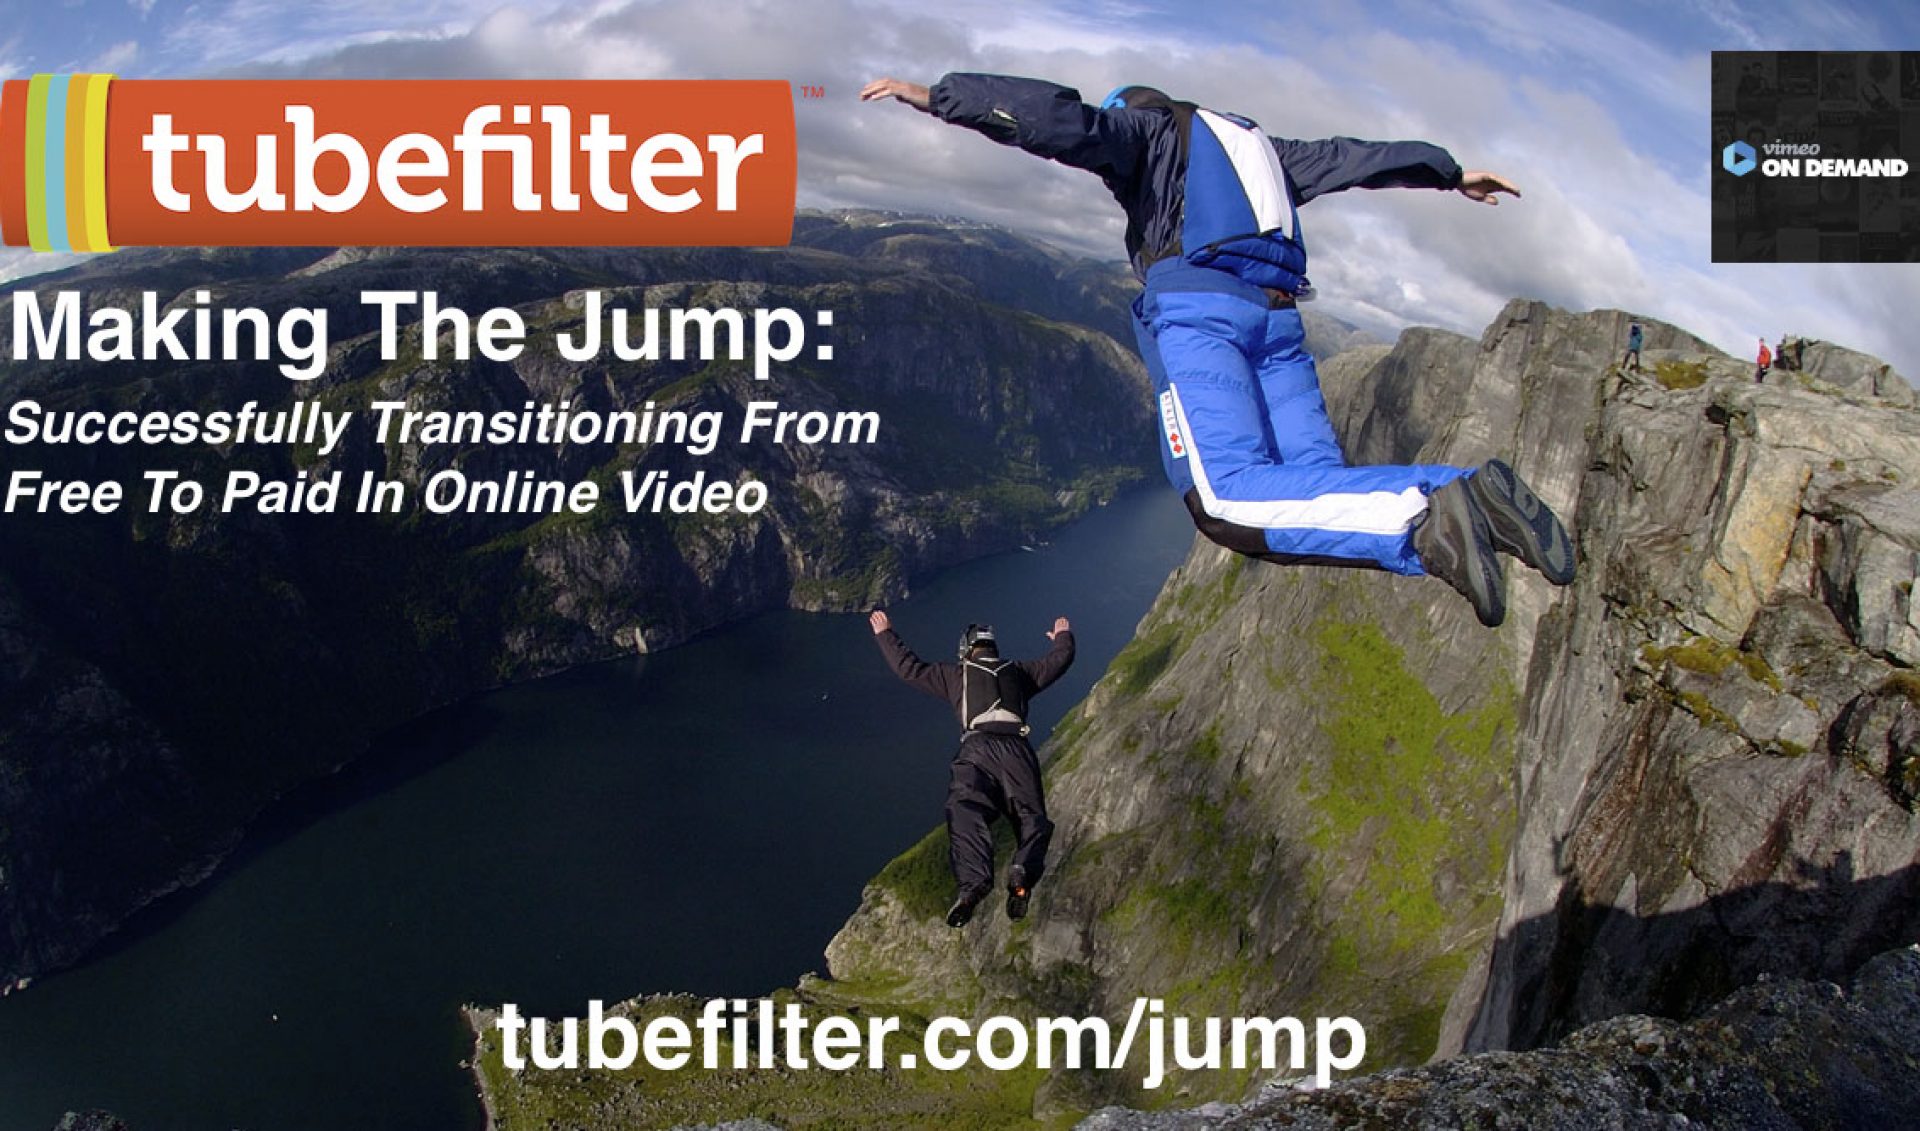 Tomorrow @ Tubefilter Meetup: Making The Jump To Paid Video with Vimeo On Demand